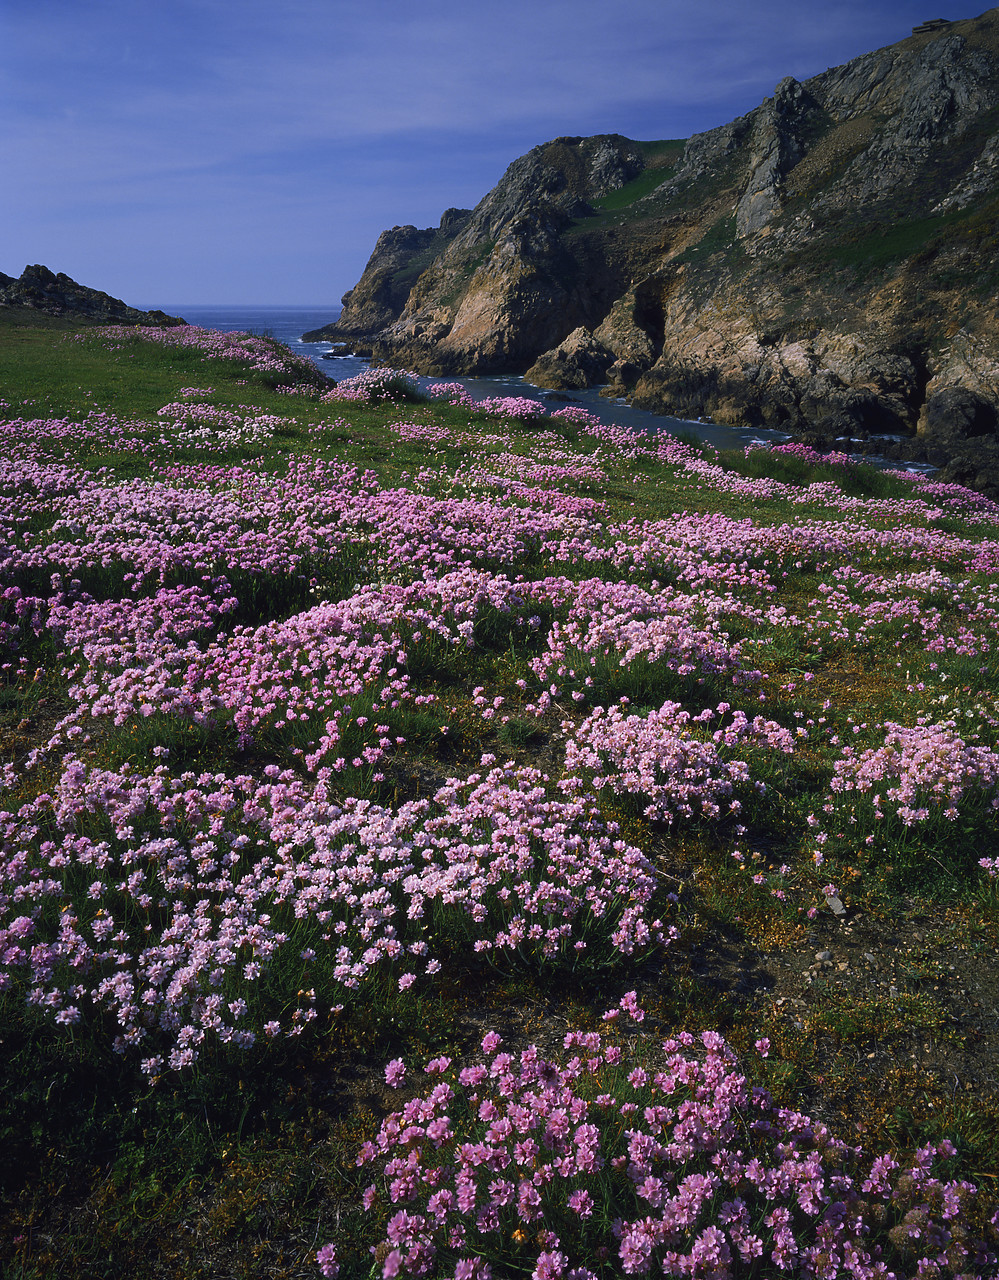 #913529 - Cliffs covered in Thrift, Le Puleq Headland, Jersey, Channel Islands